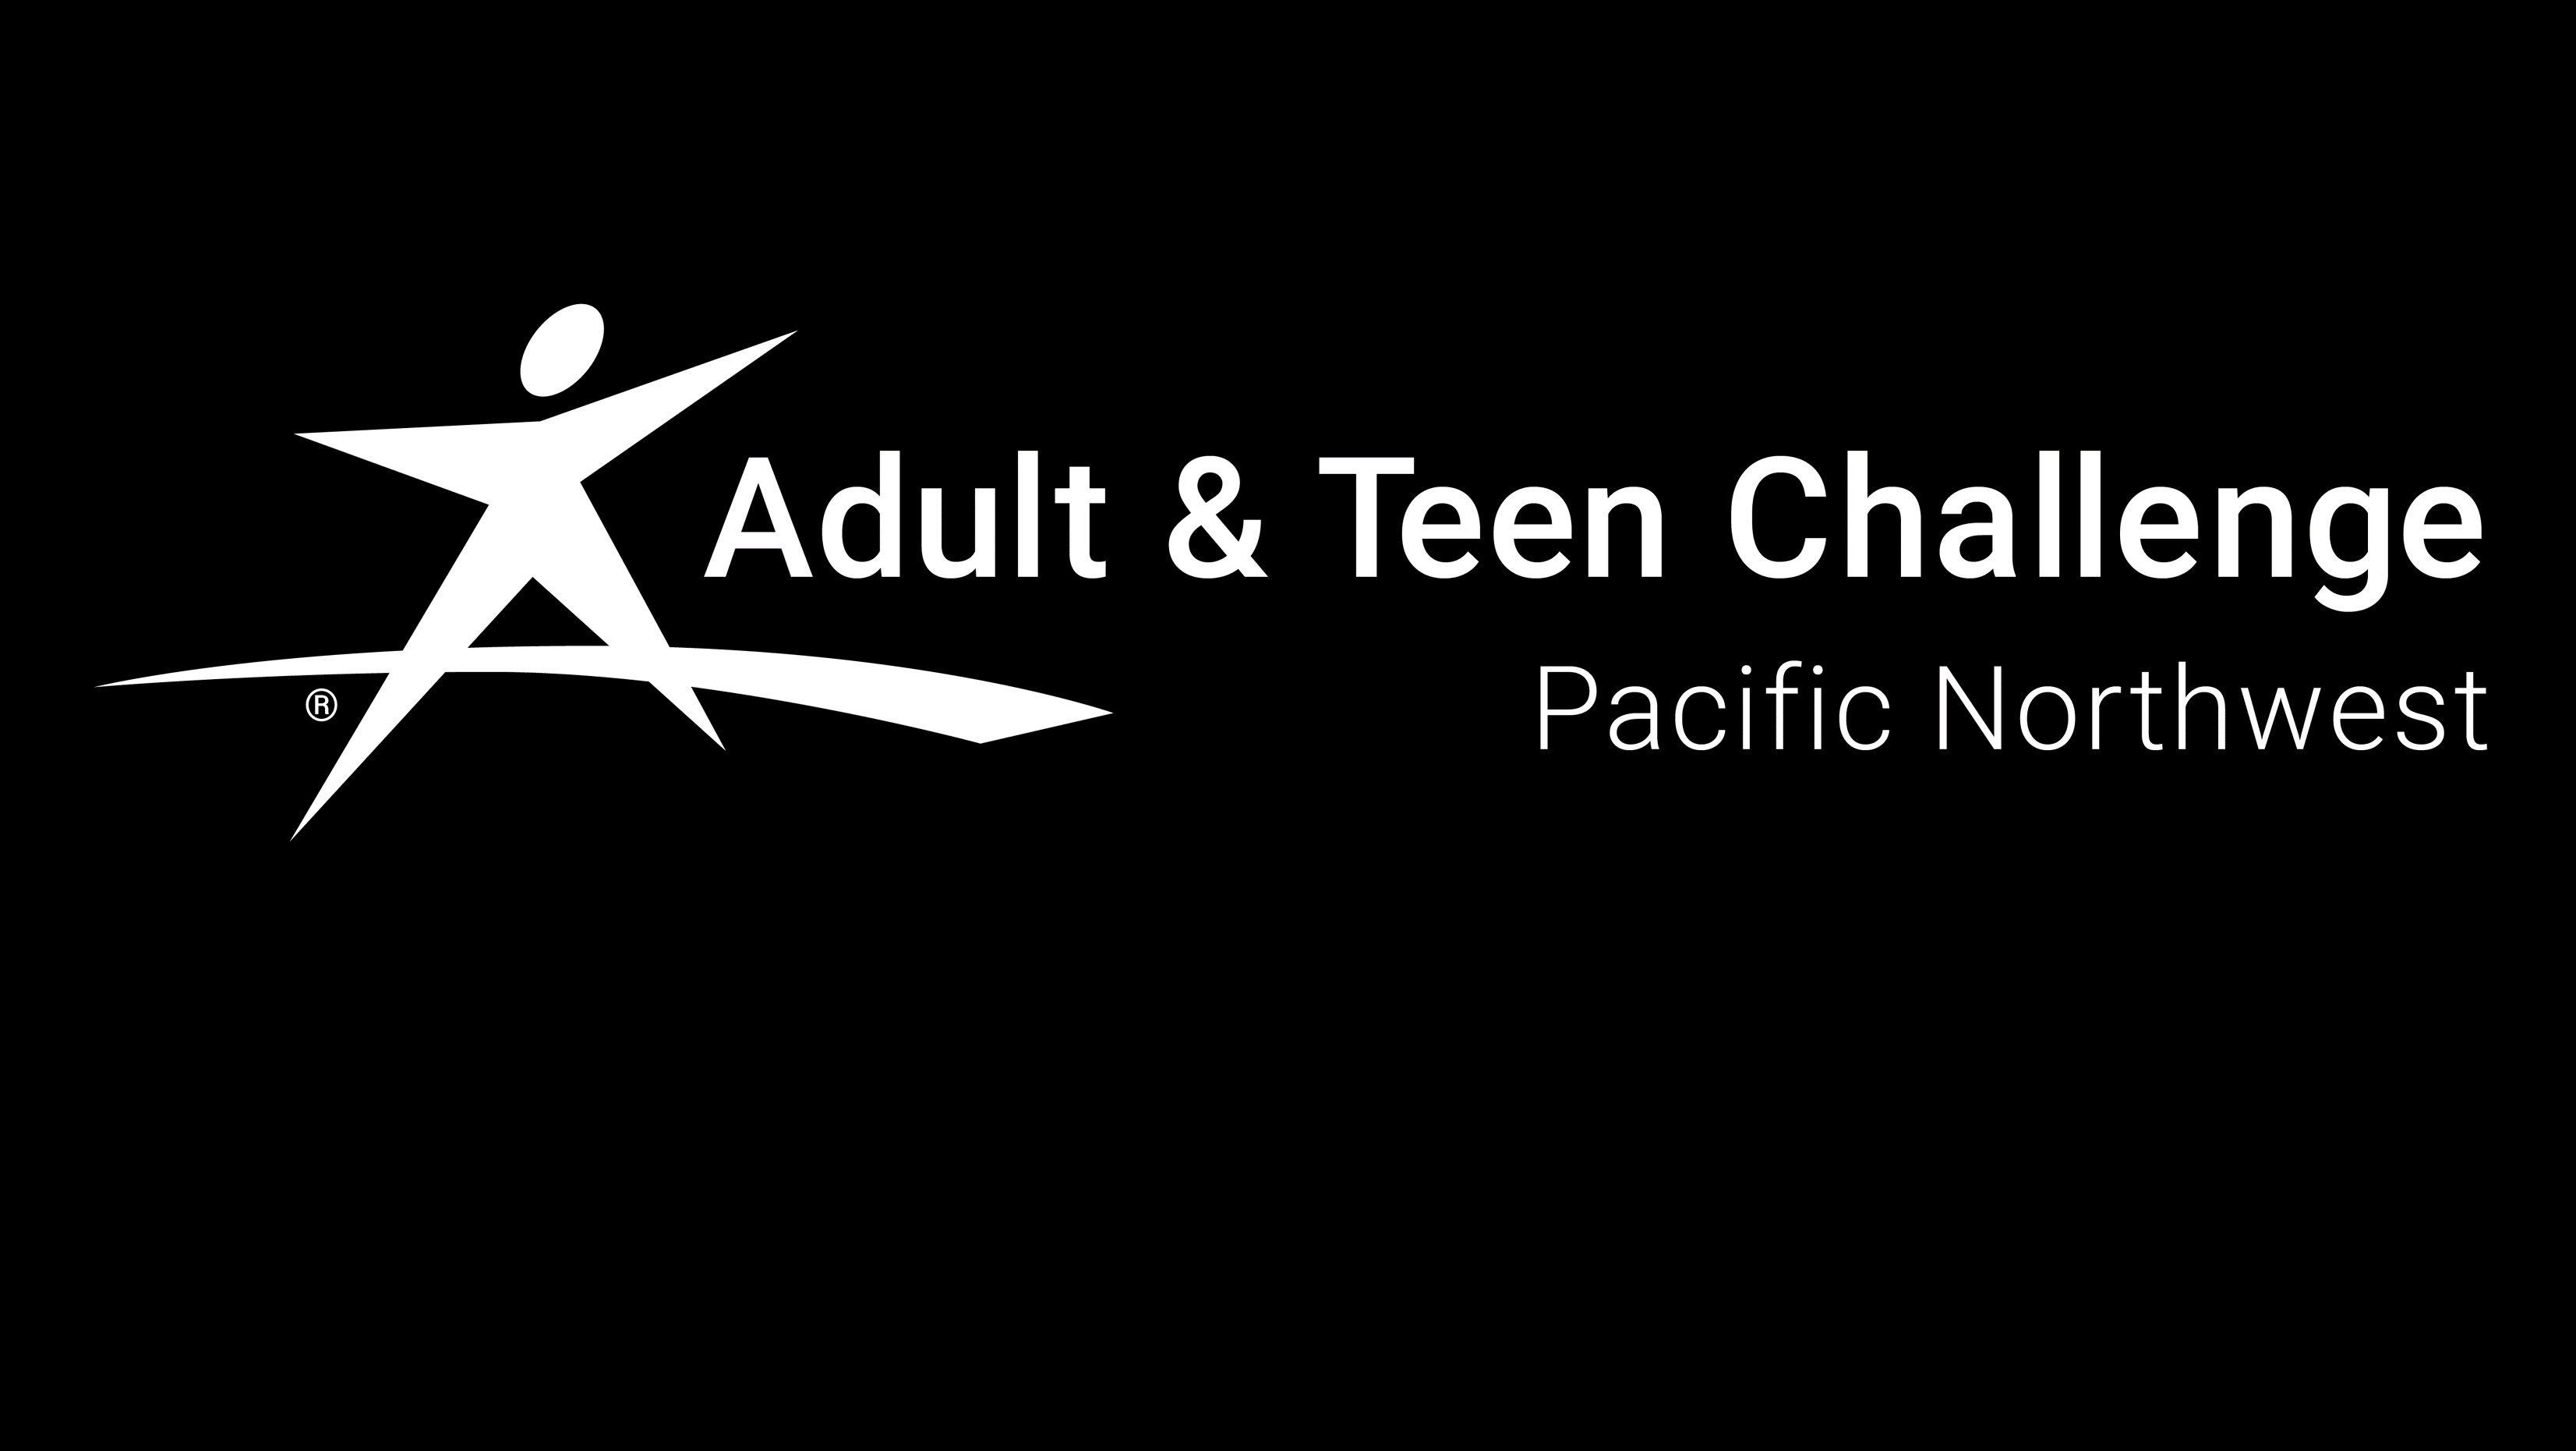 Missions Emphasis: Adult & Teen Challenge Pacific NW